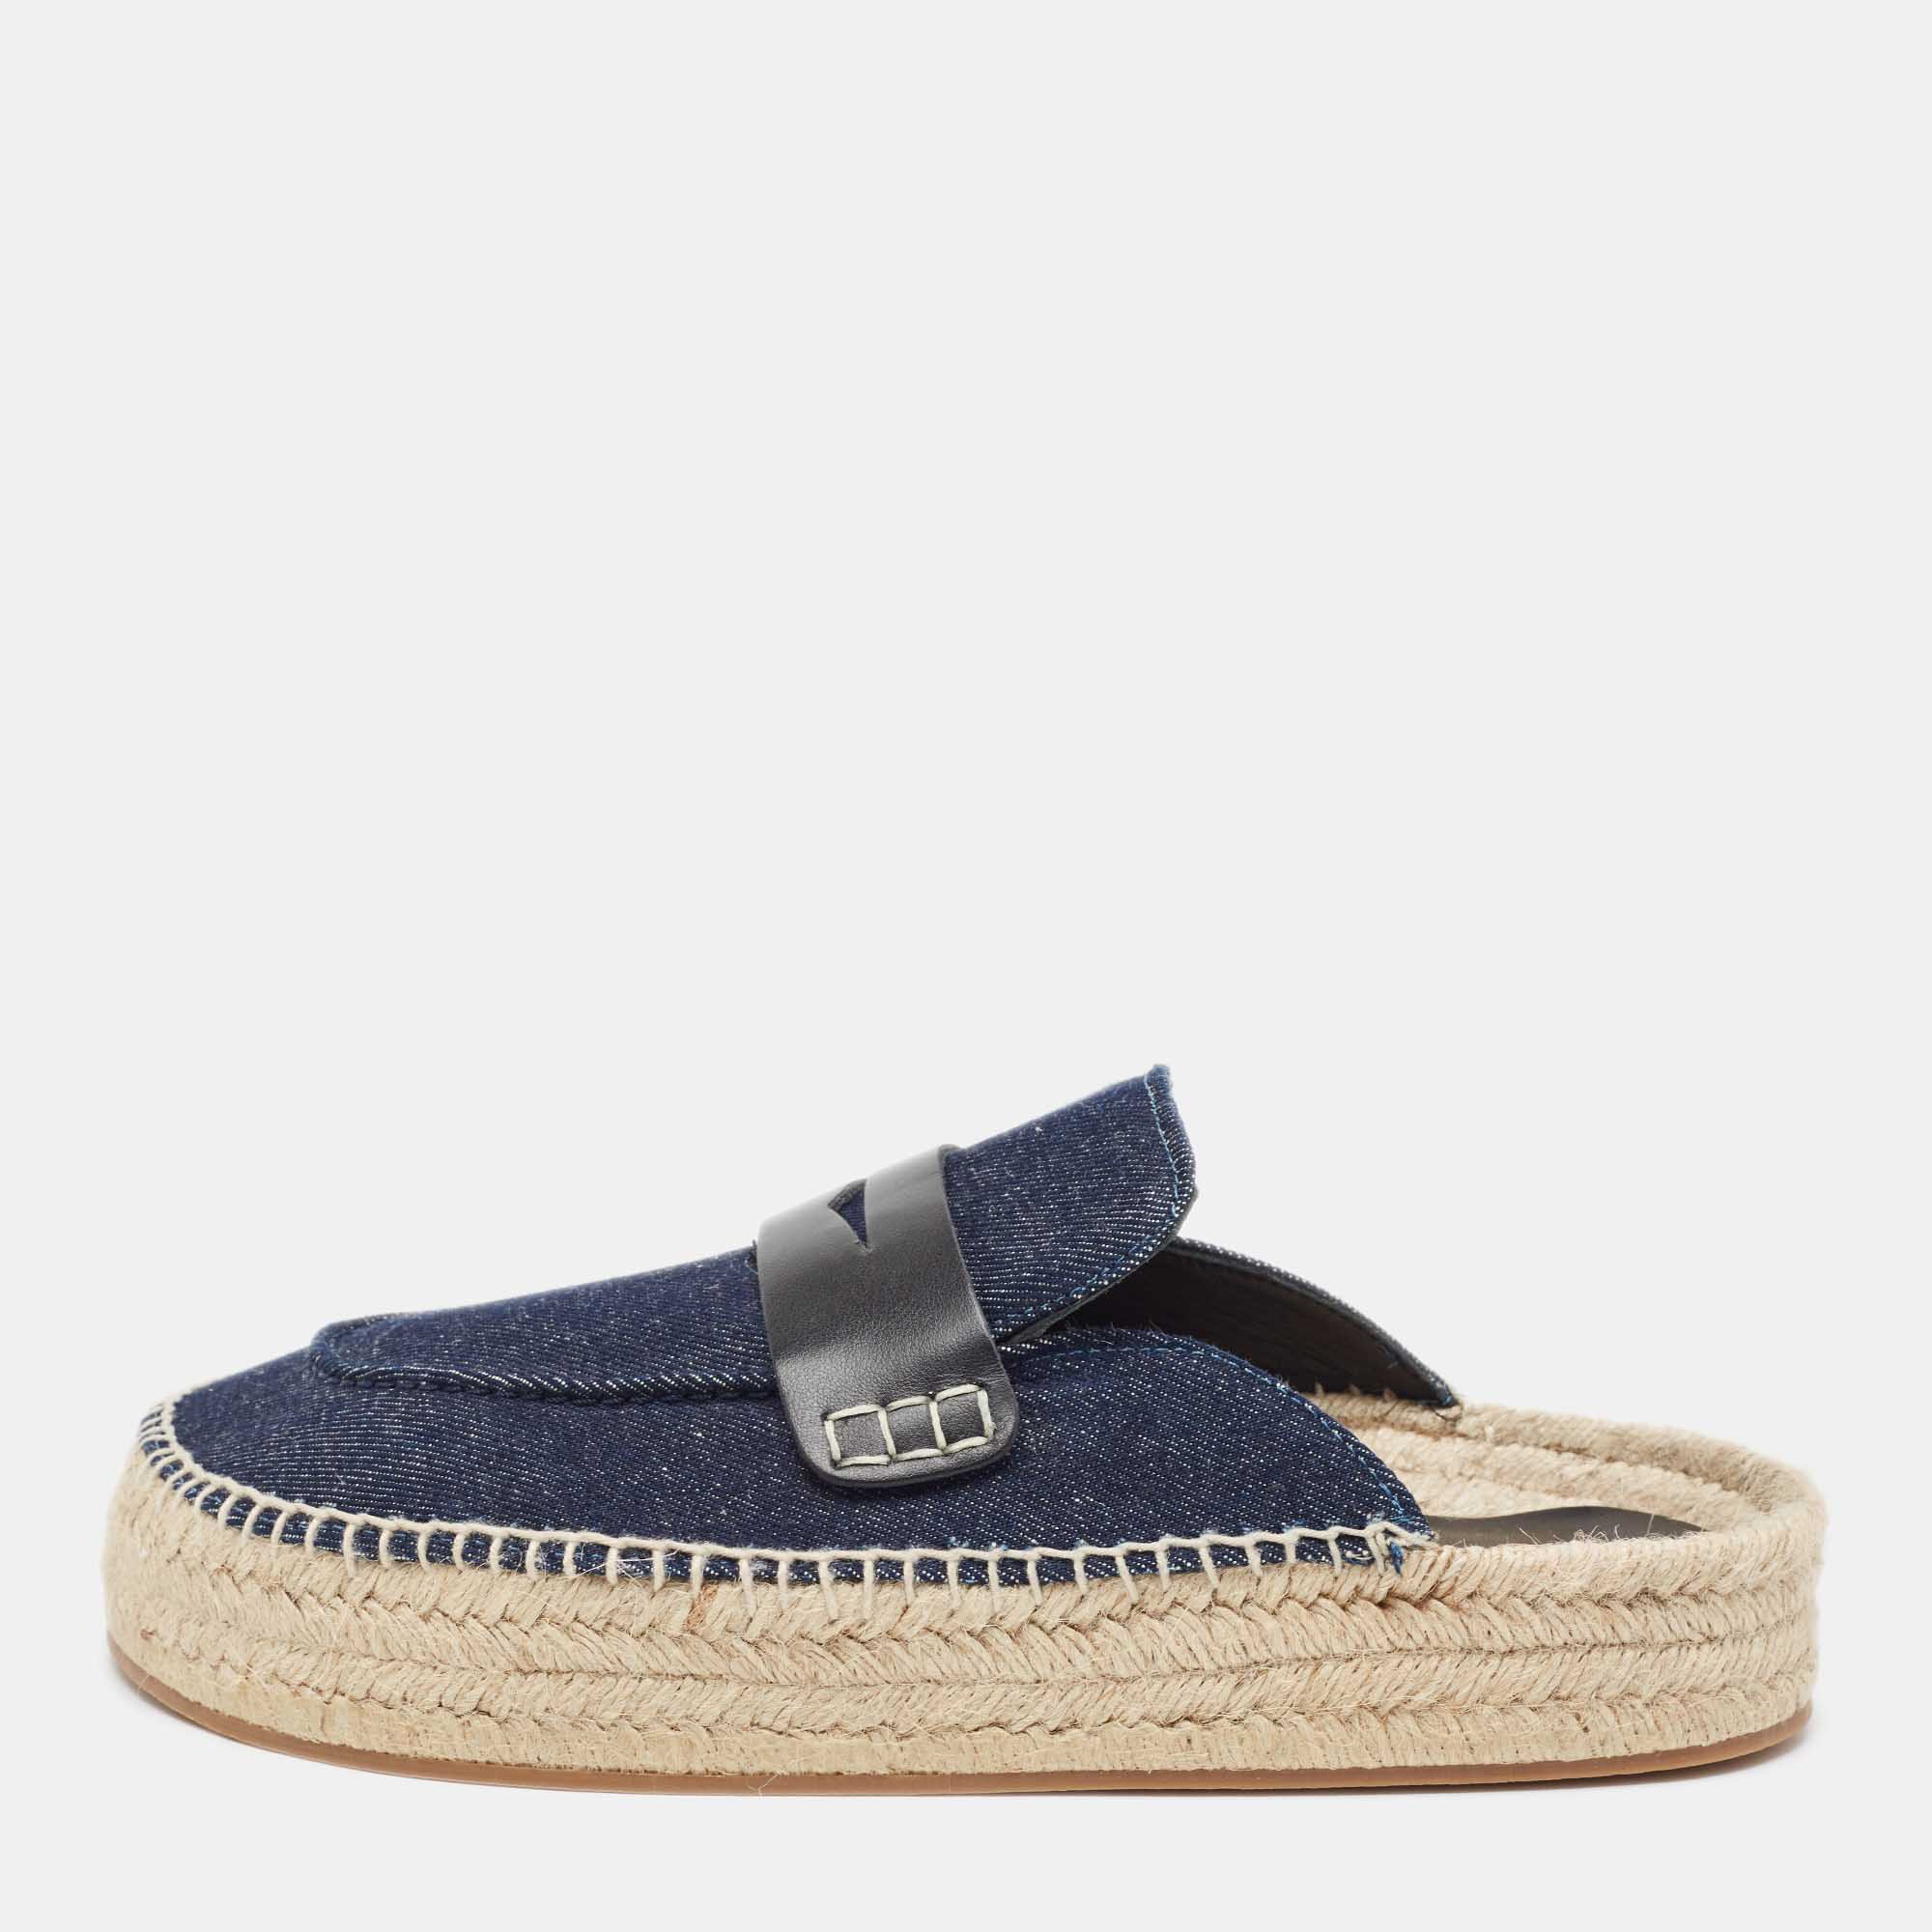 These designer espadrilles exude cool summer vibes while giving all the comfort to your feet. They bring along a well built silhouette and the houses signature aesthetics. Wear them with anything: jeans dresses shorts.